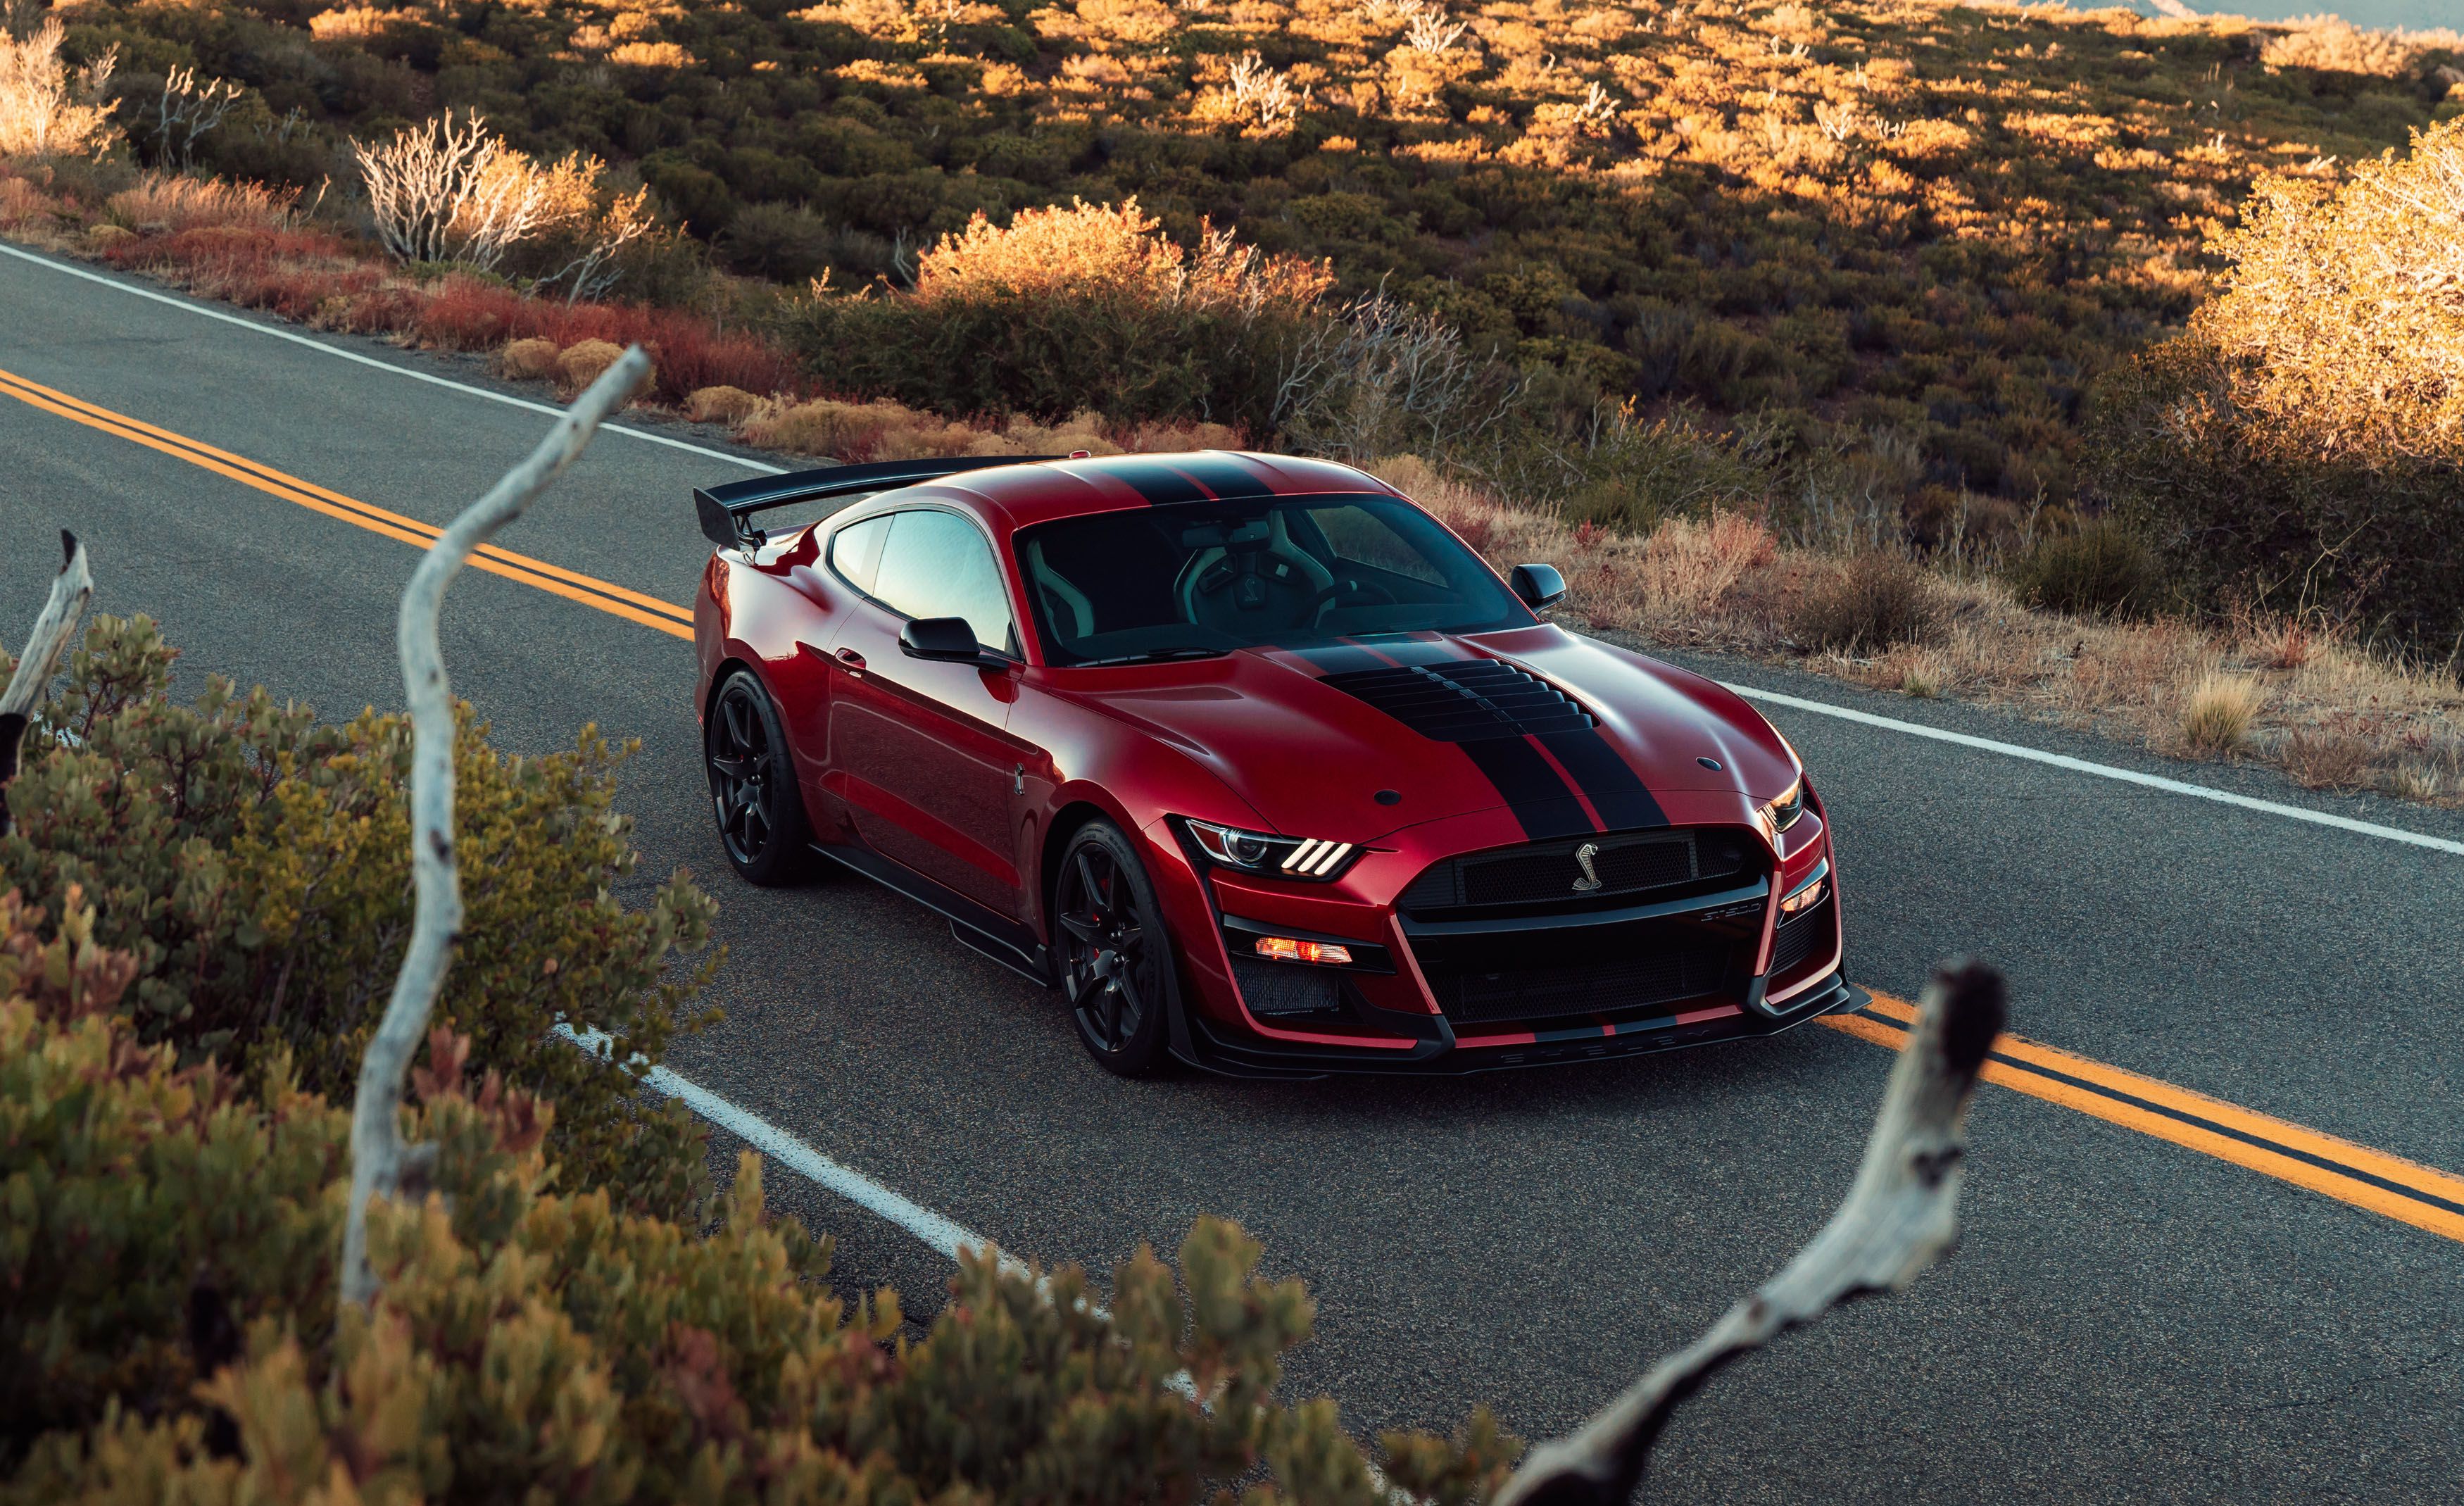 The Mustang Shelby 2020 will receive a 700 plus HP at a Red-Line of 7500 rpm.